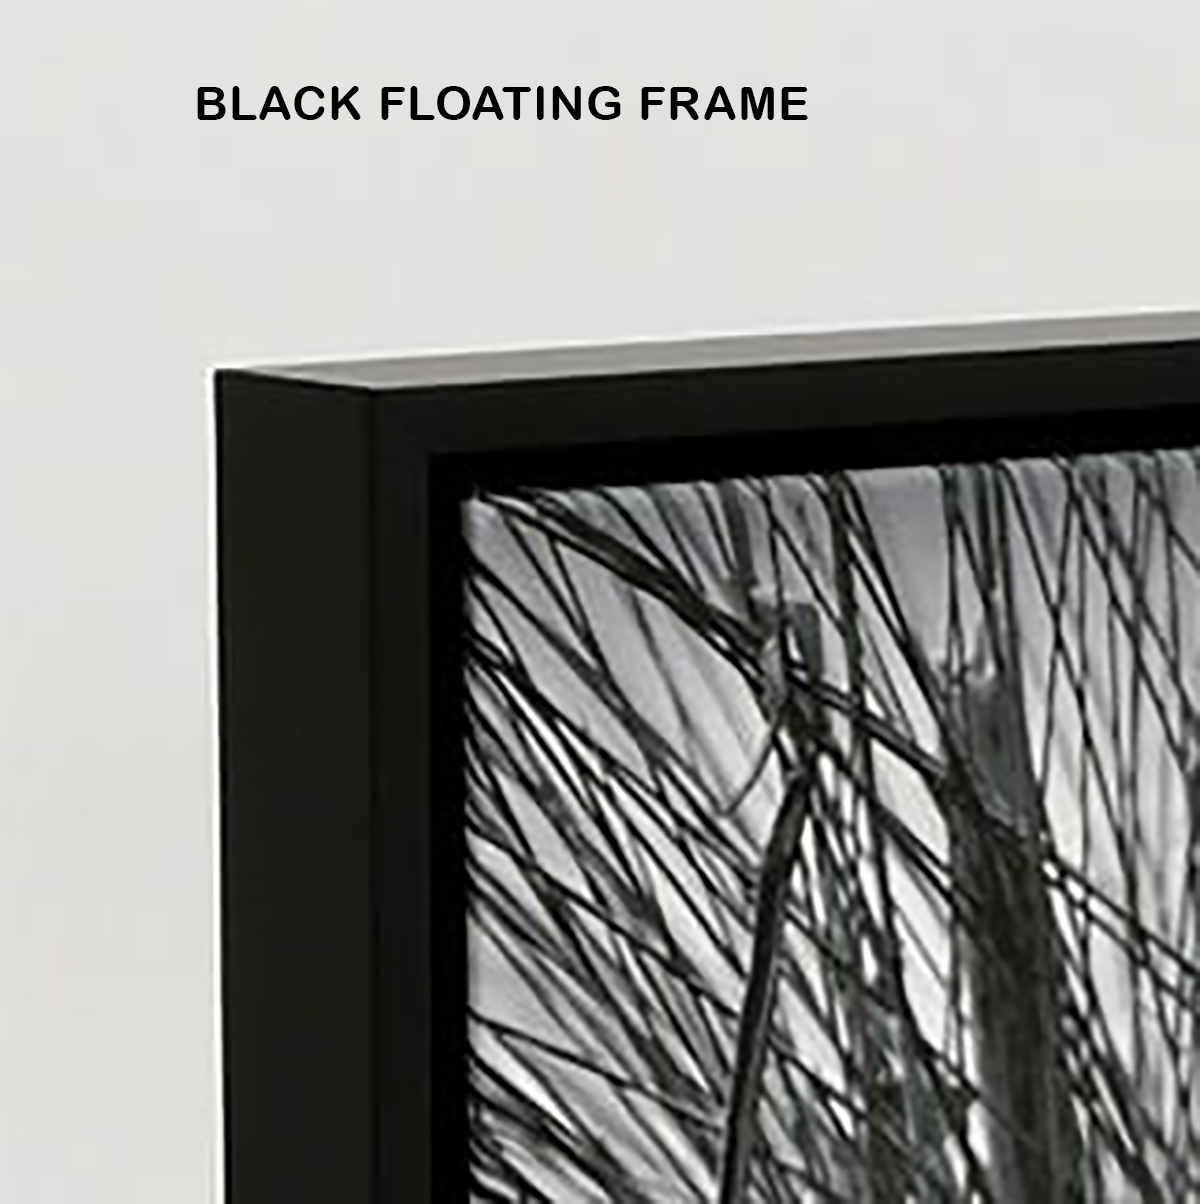  FLOATING FRAME (SHADOW BOX) - Panoramic Canvas Prints - YOUR OWN CUSTOM IMAGE | Black_Floating_frameV1.jpg